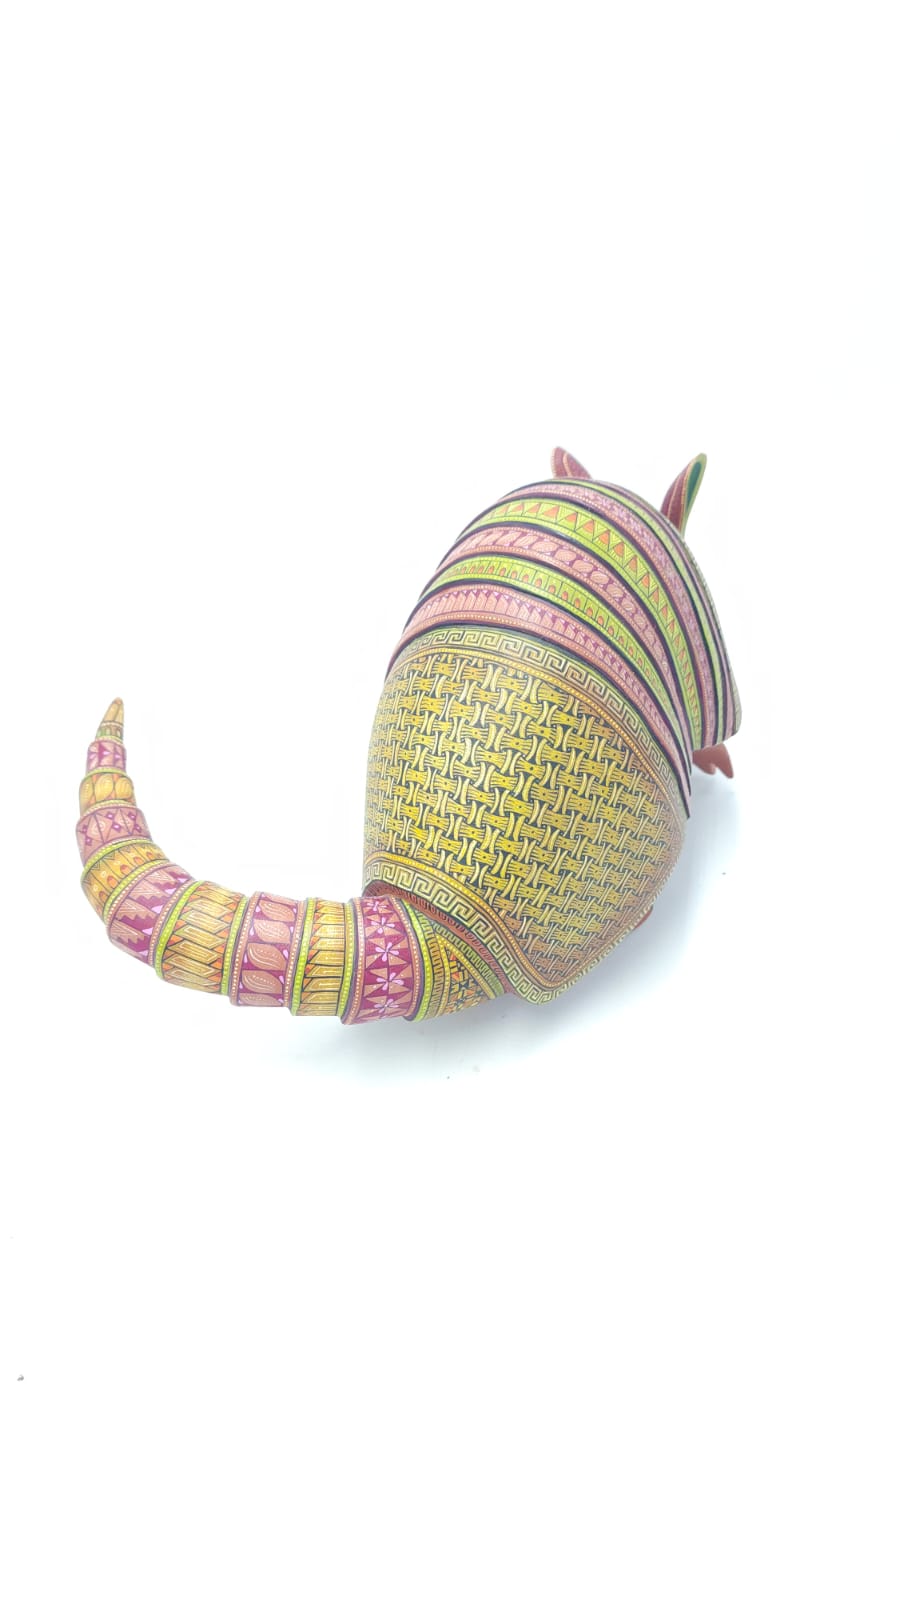 Oaxacan Wood Carving Armadillo By Jacobo y Maria Angeles PP6099